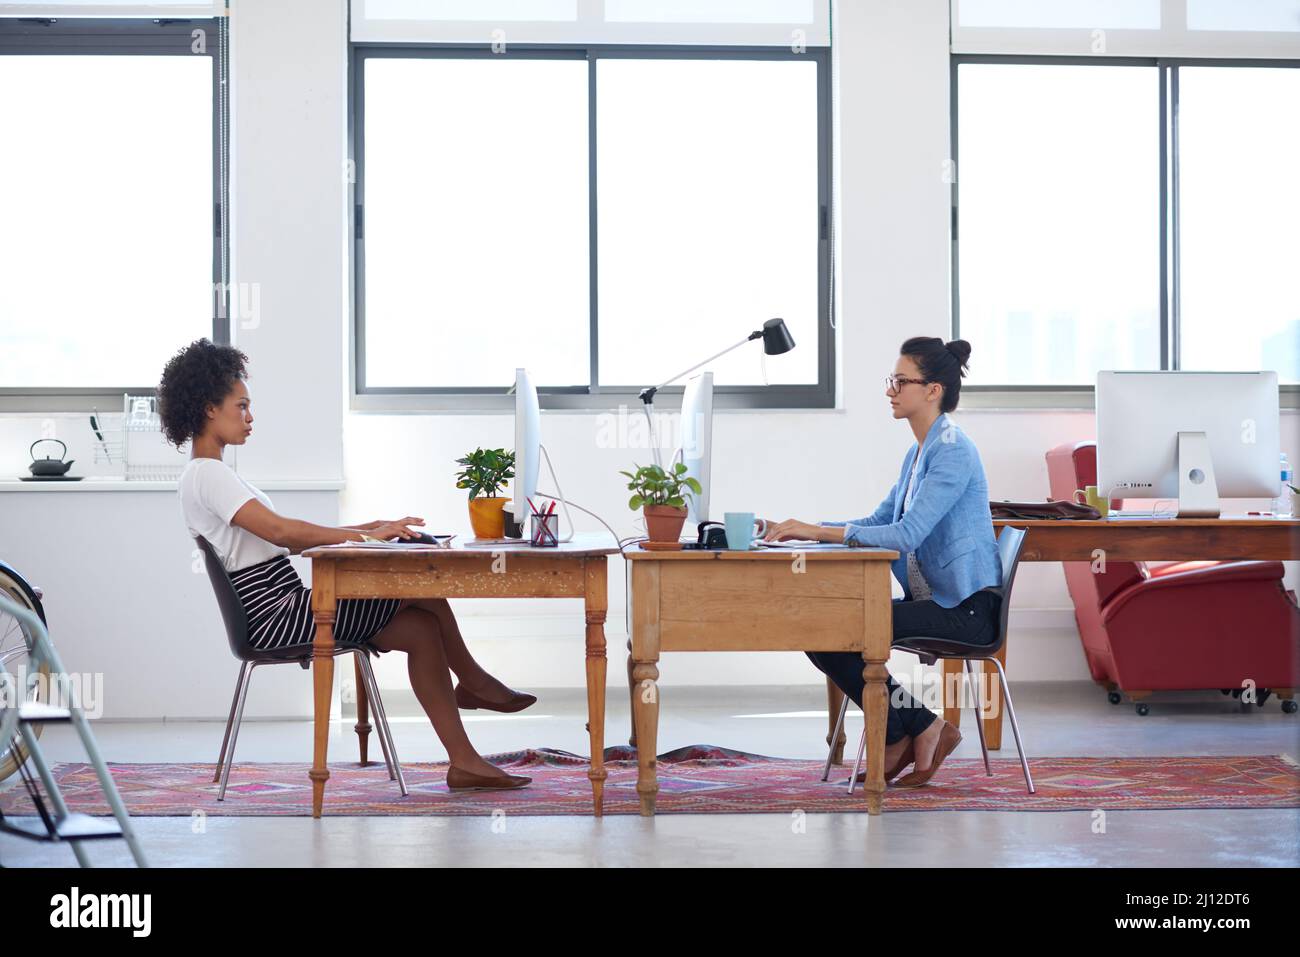 Creative space for contemporary business. Wide angle image of two female creative professionals in an open plan office space. Stock Photo